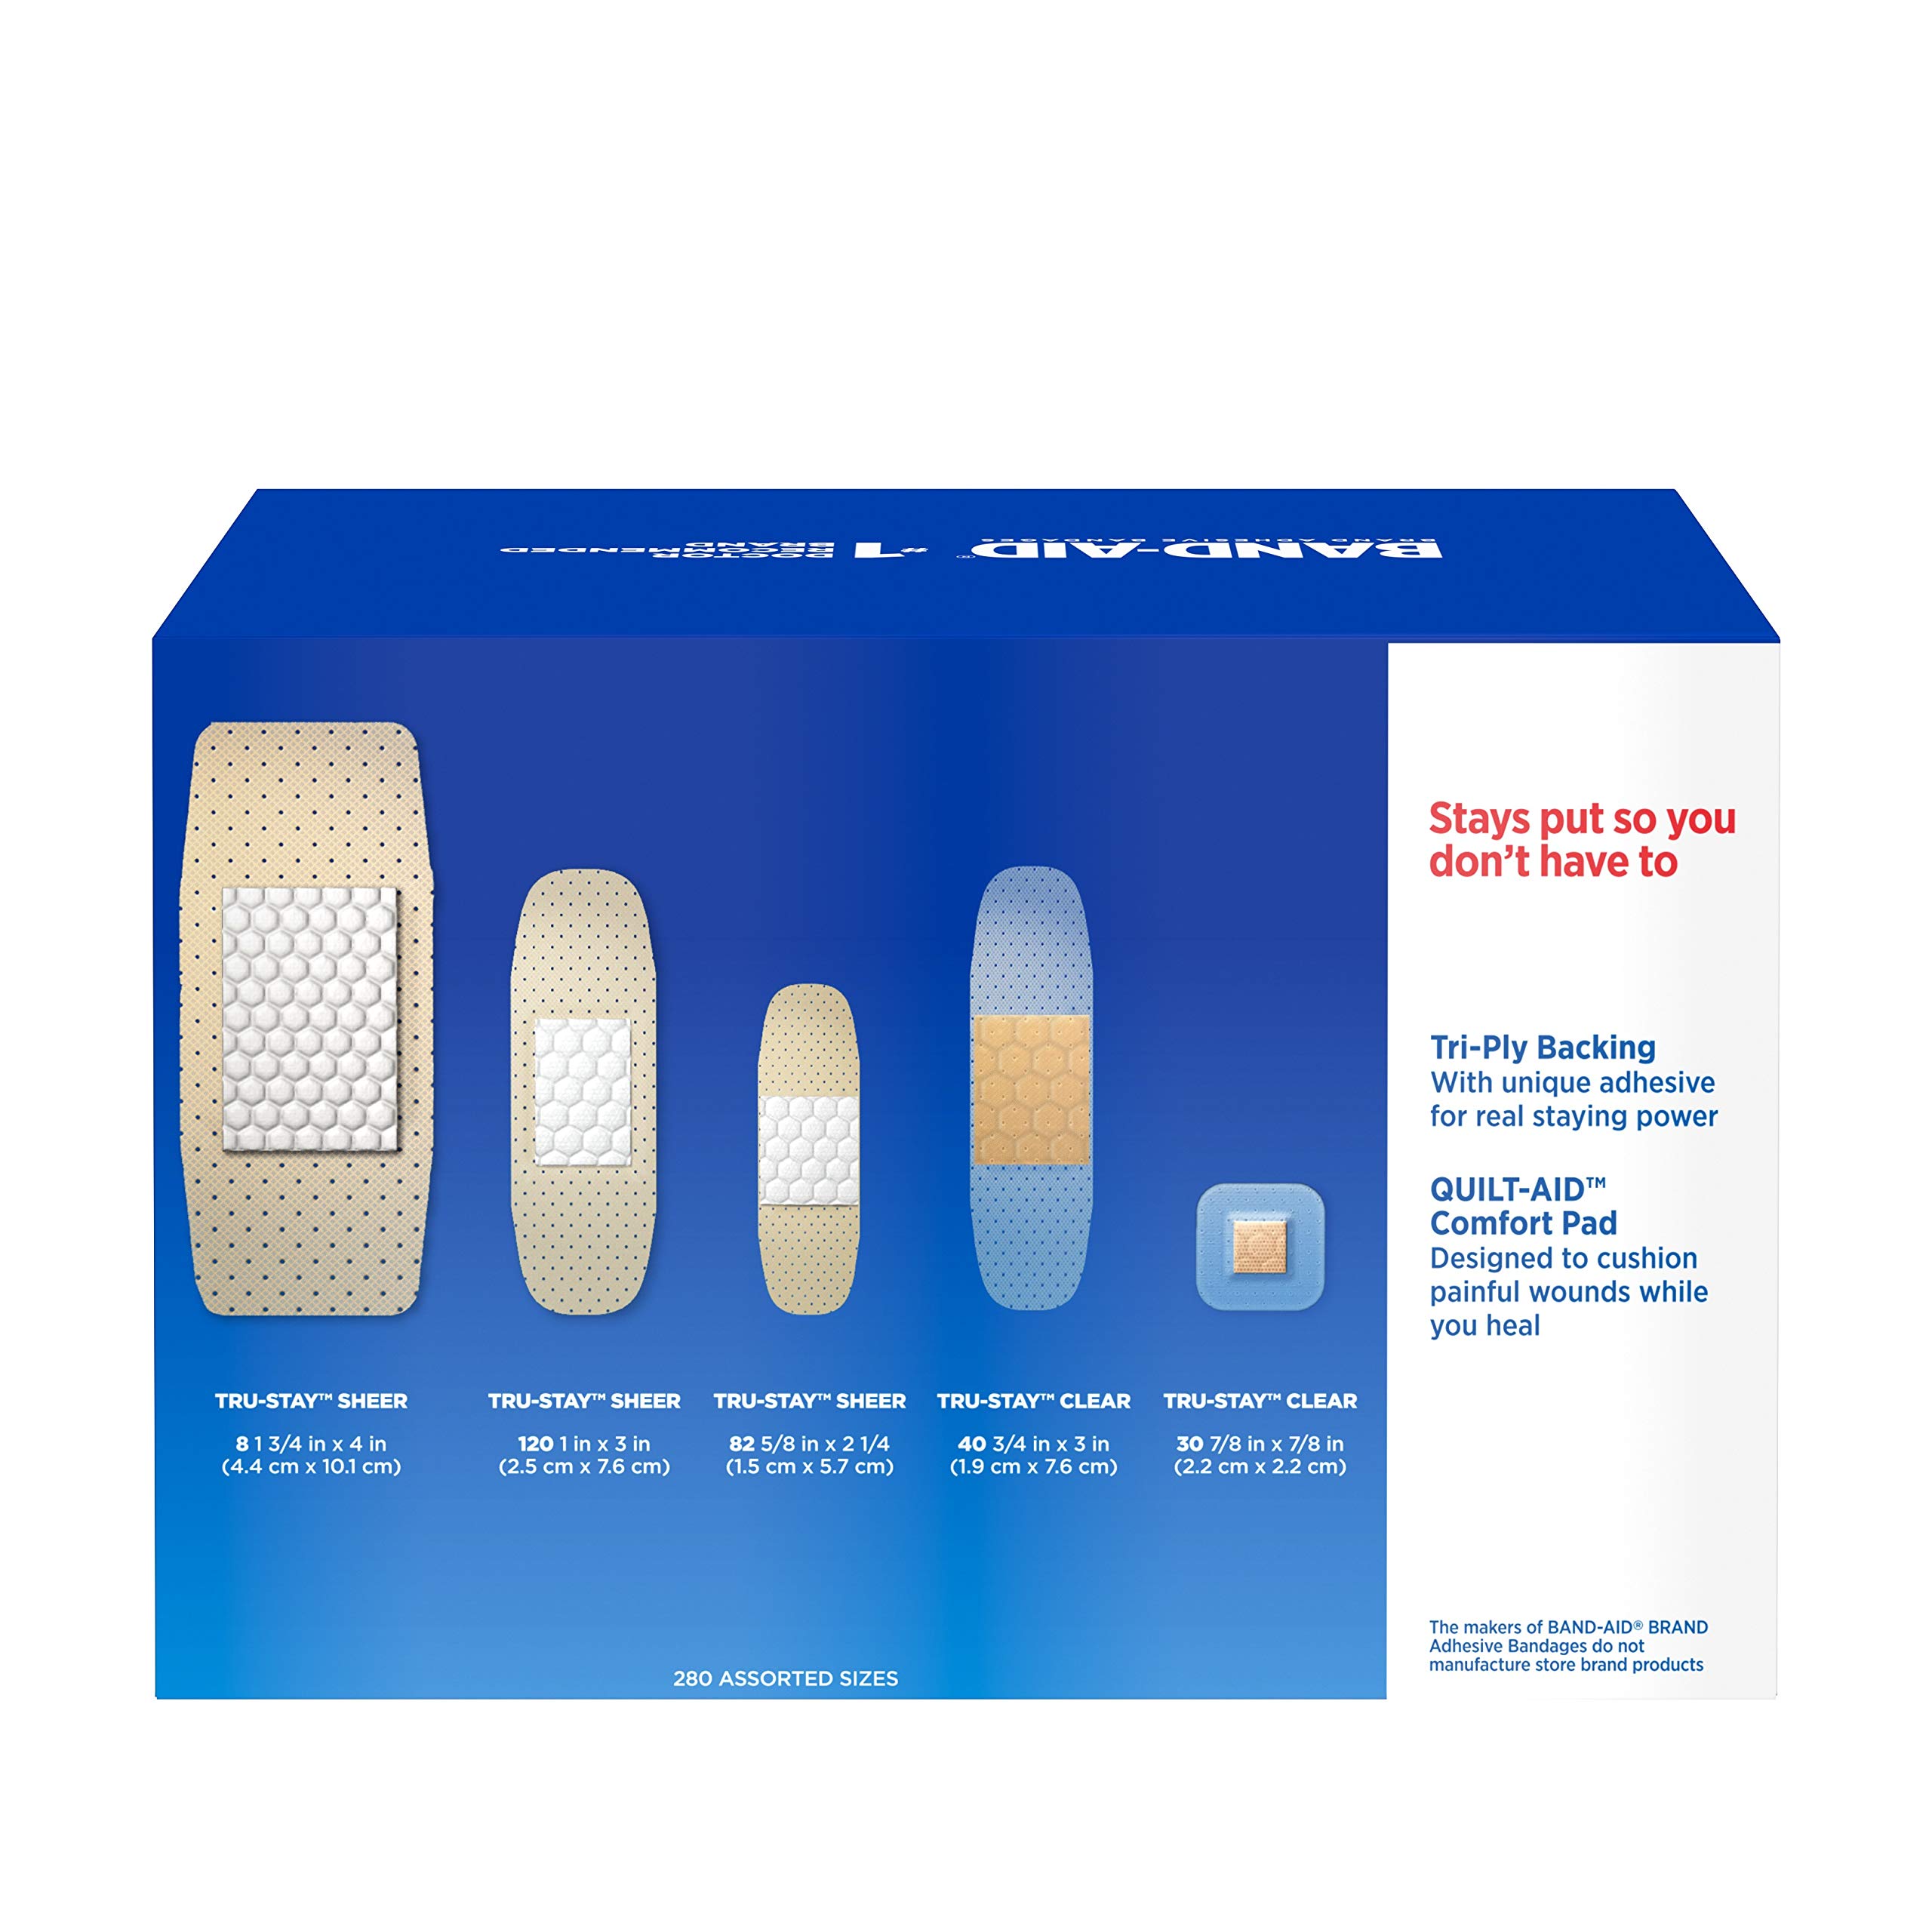 Band-Aid Brand Adhesive Bandage Family Variety Pack, Sheer and Clear Bandages, Assorted Sizes, 280 ct